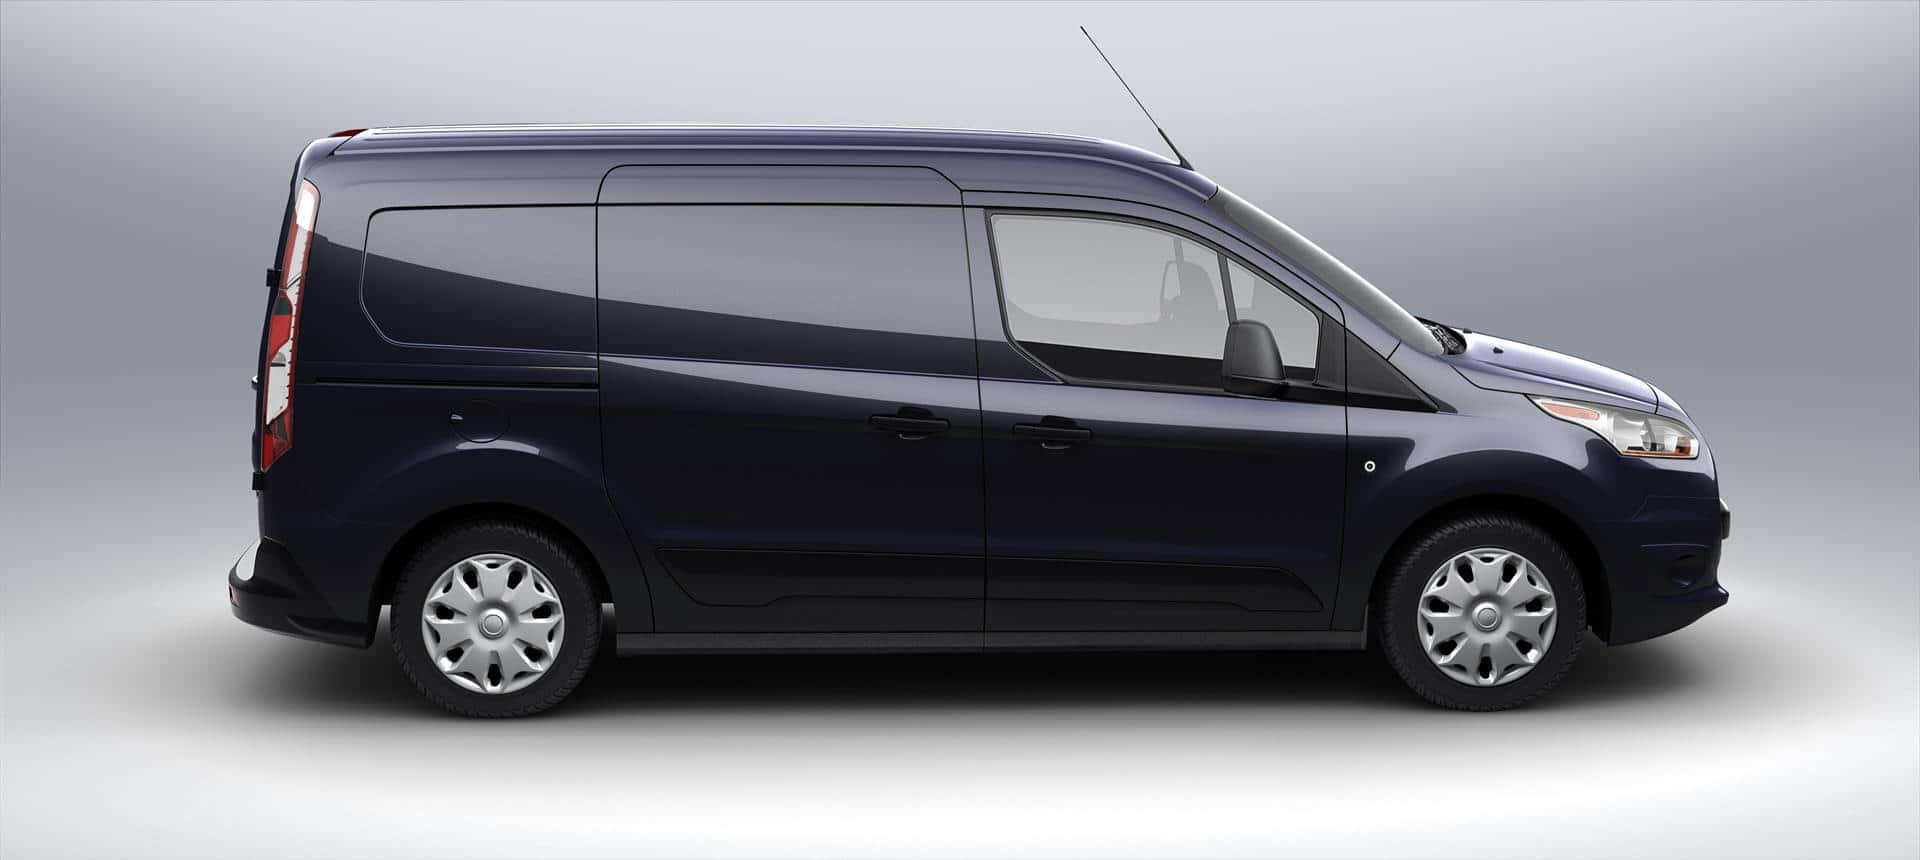 Sleek and Modern Ford Transit on the Road Wallpaper